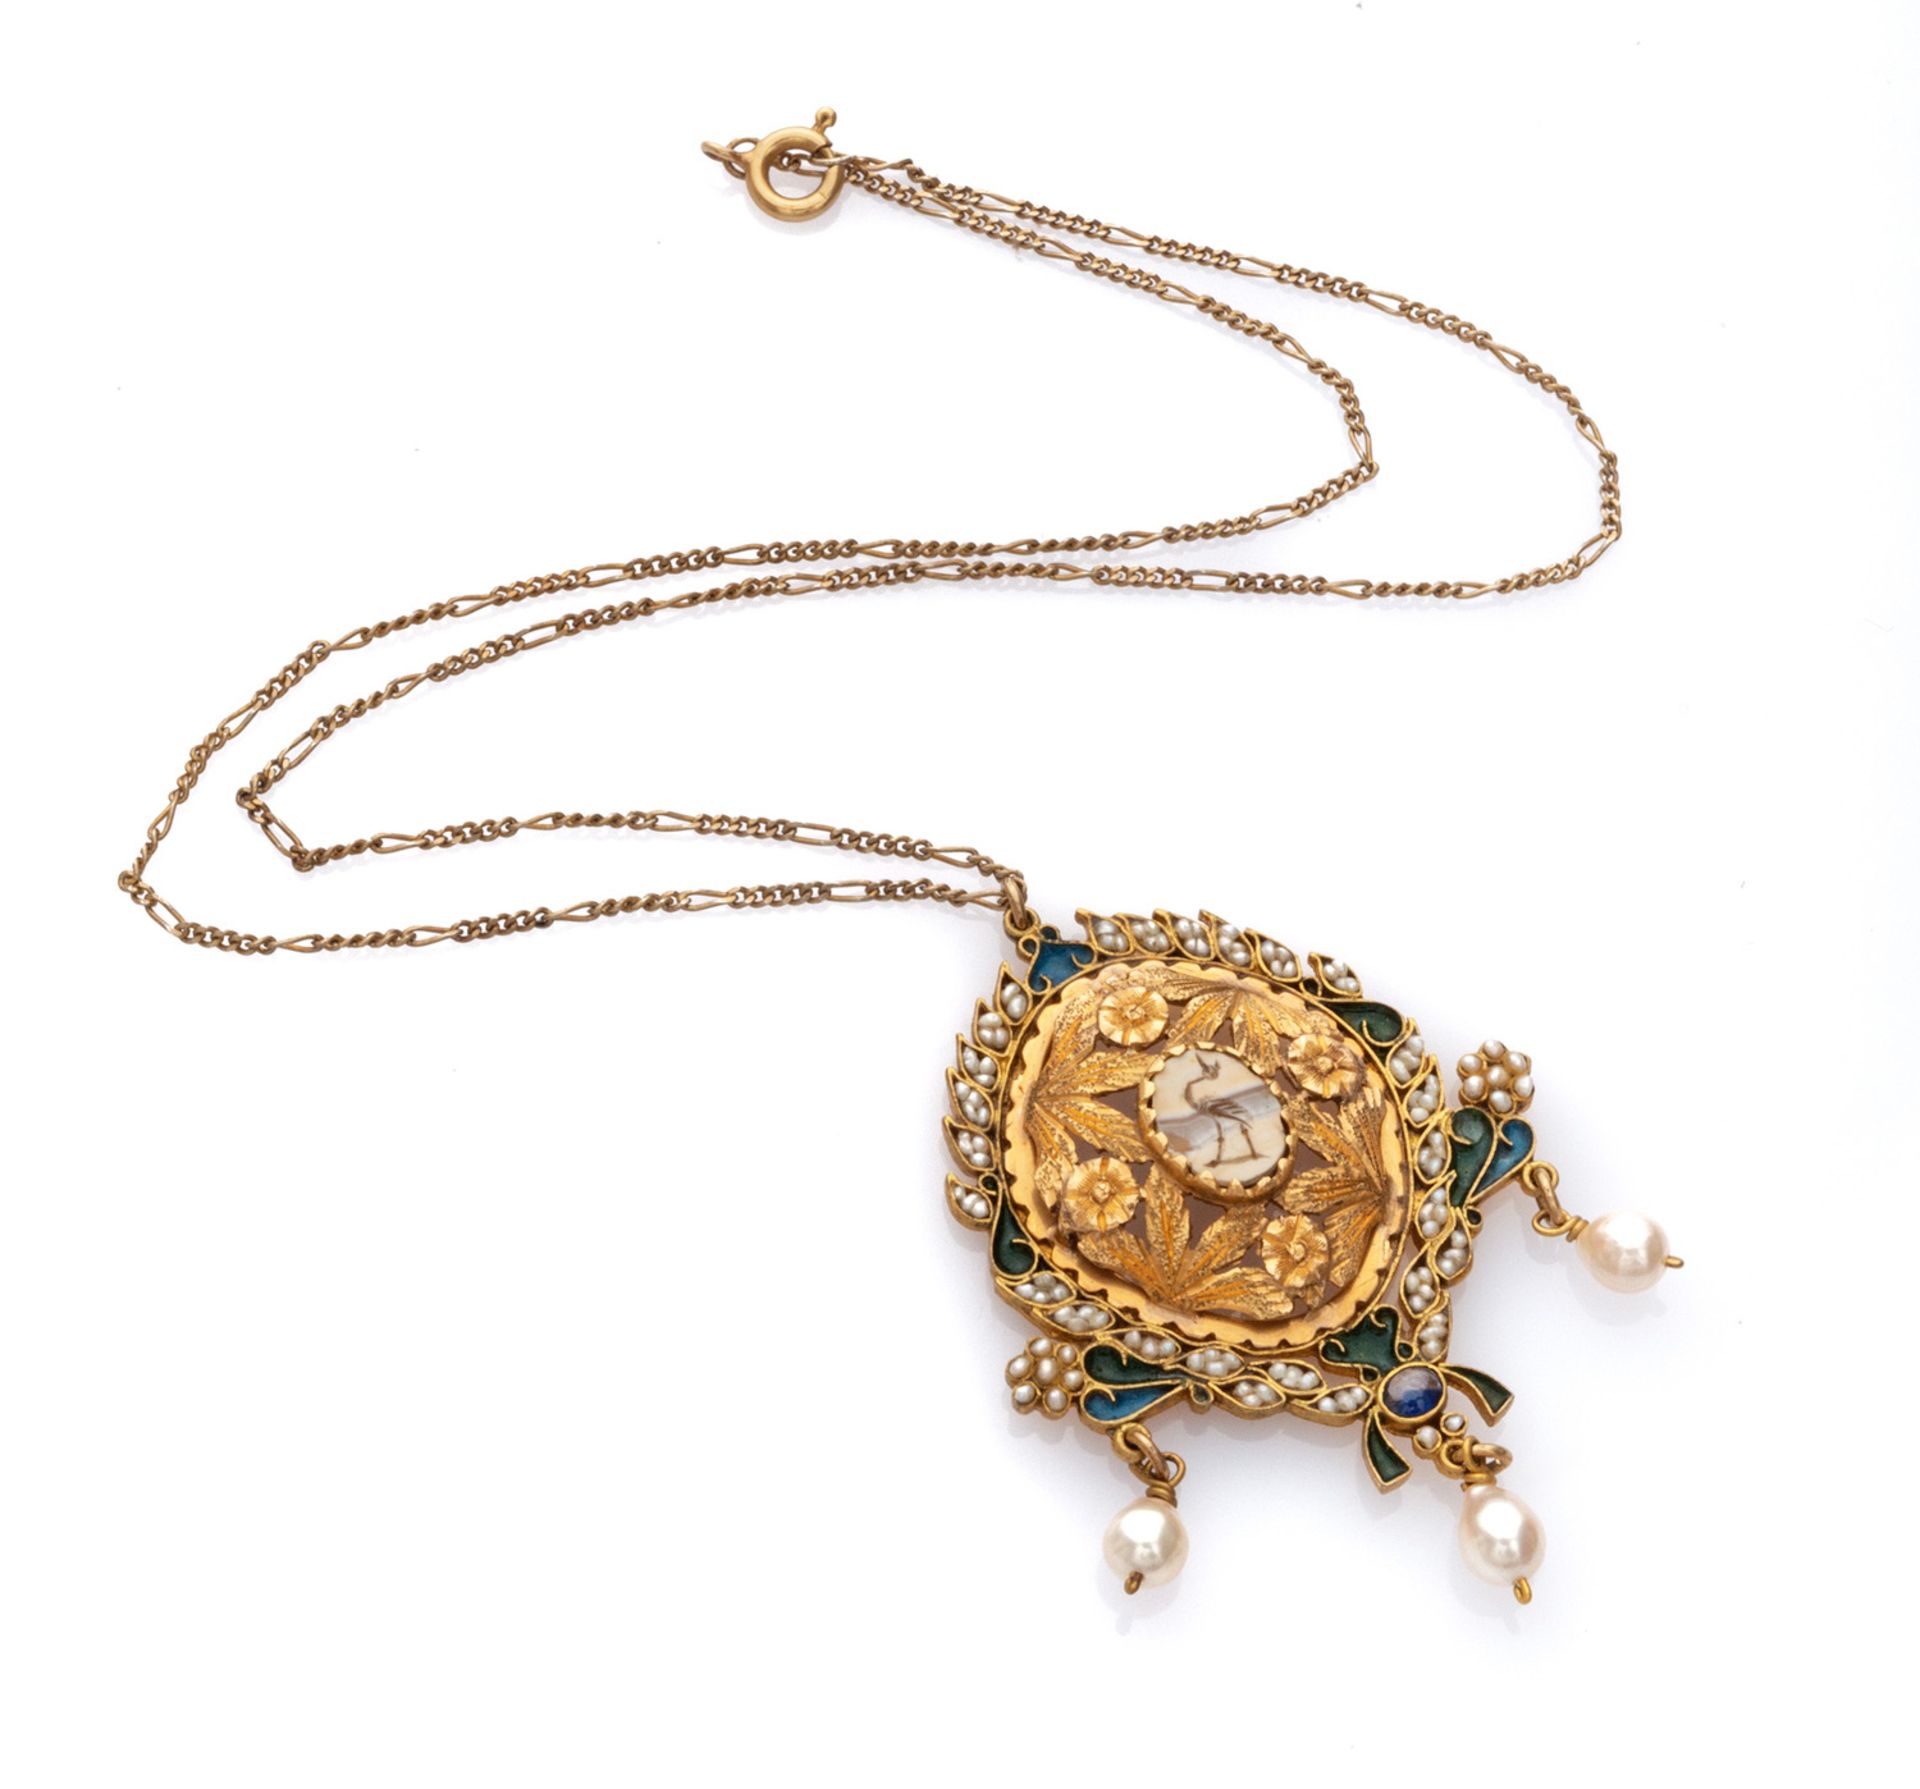 ATTRACTIVE NECKLACE chain with pendant pierced to motifs for flowers and leaves with frame OF